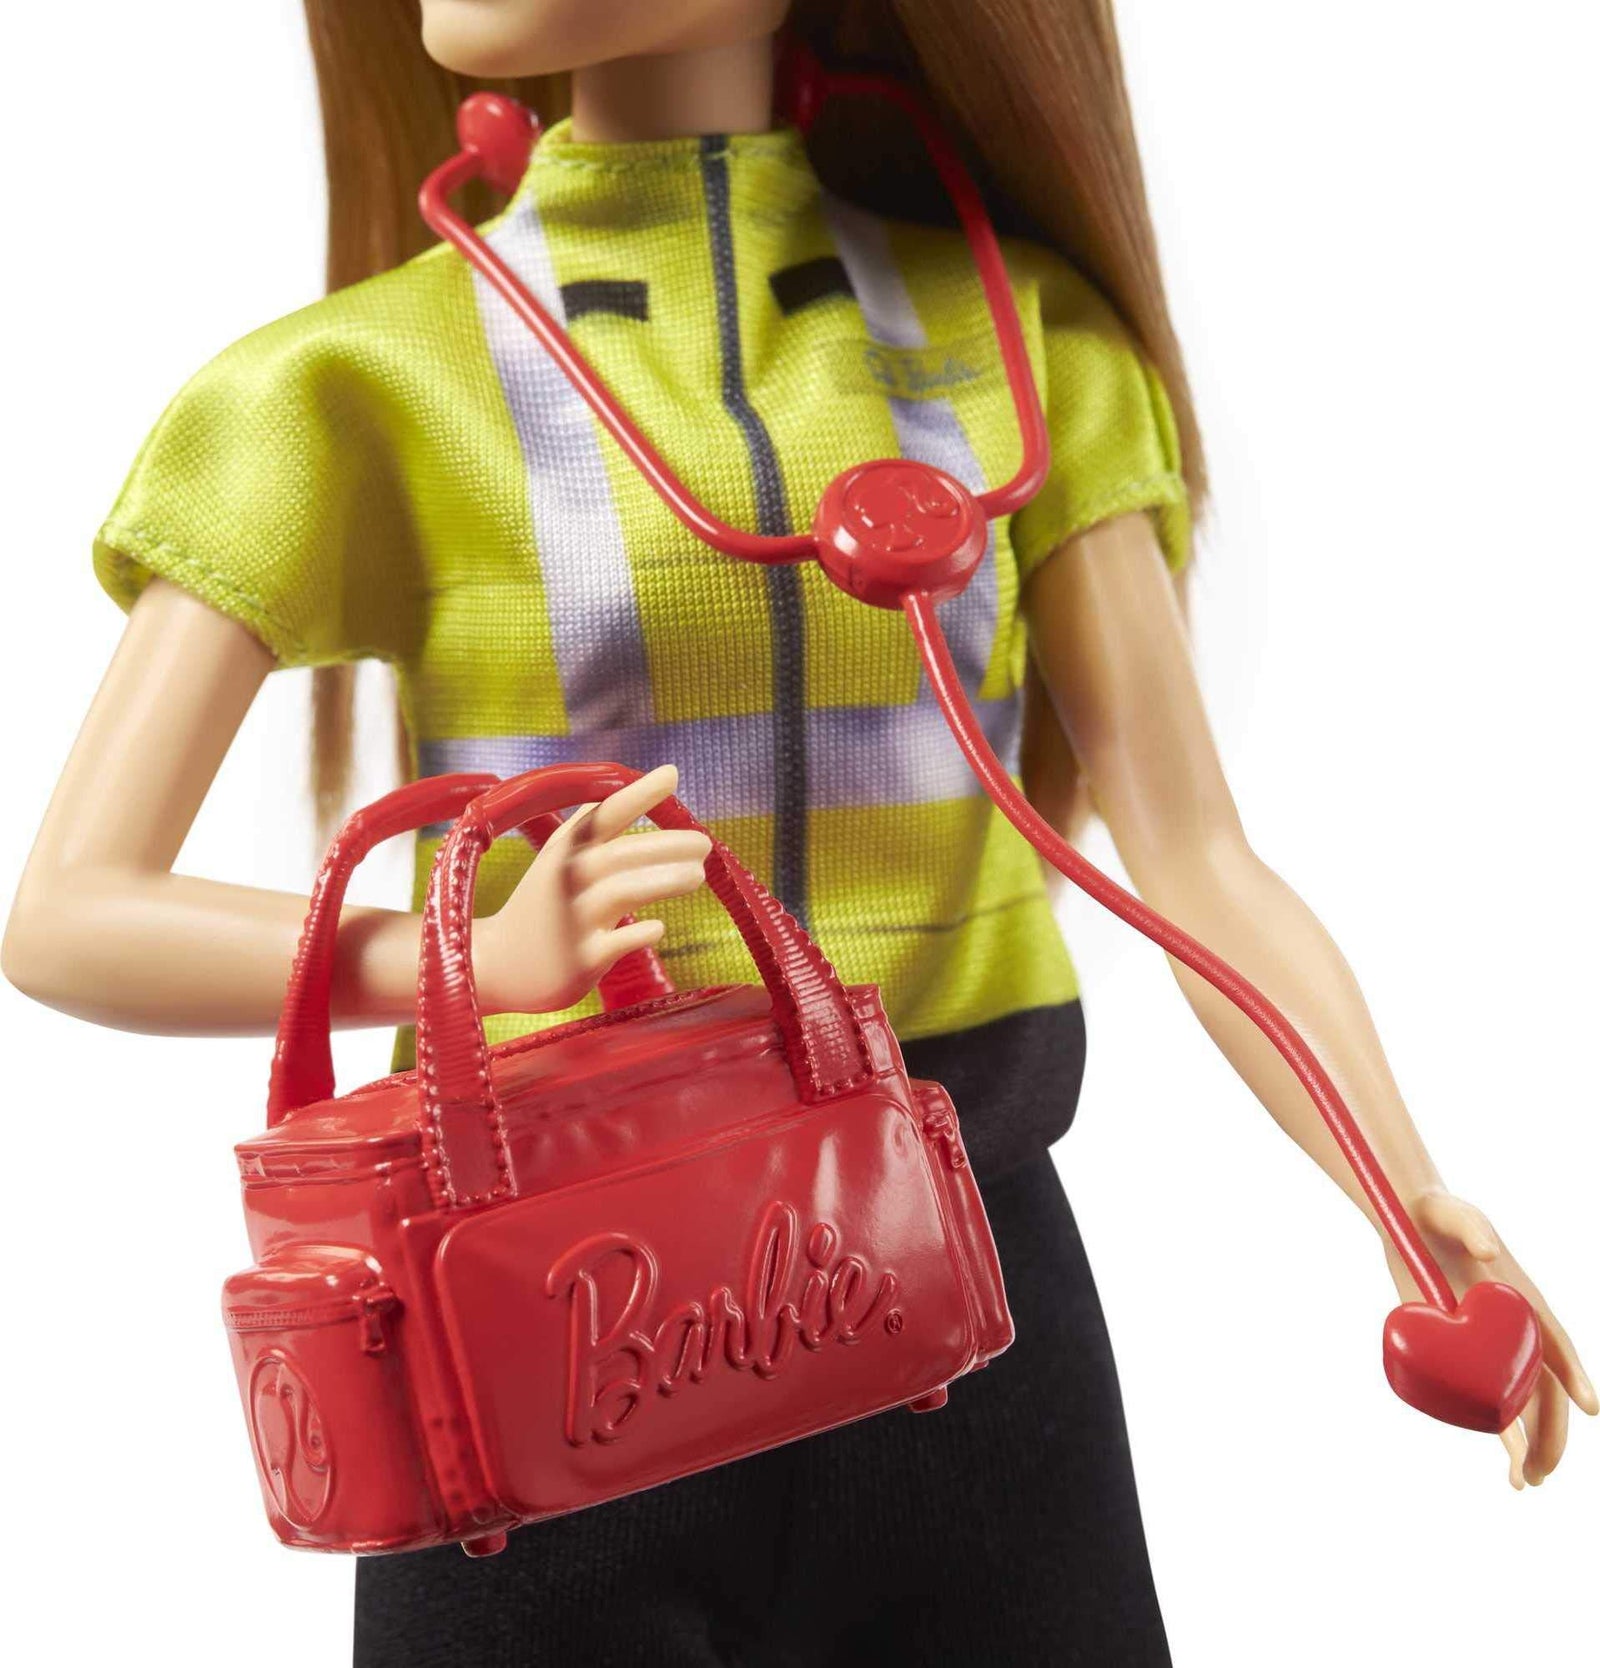 Barbie Paramedic Doll, Petite Brunette (12-in), Role-play Clothing & Accessories: Stethoscope, Medical Bag, Great Toy Gift for Ages 3 Years Old & Up